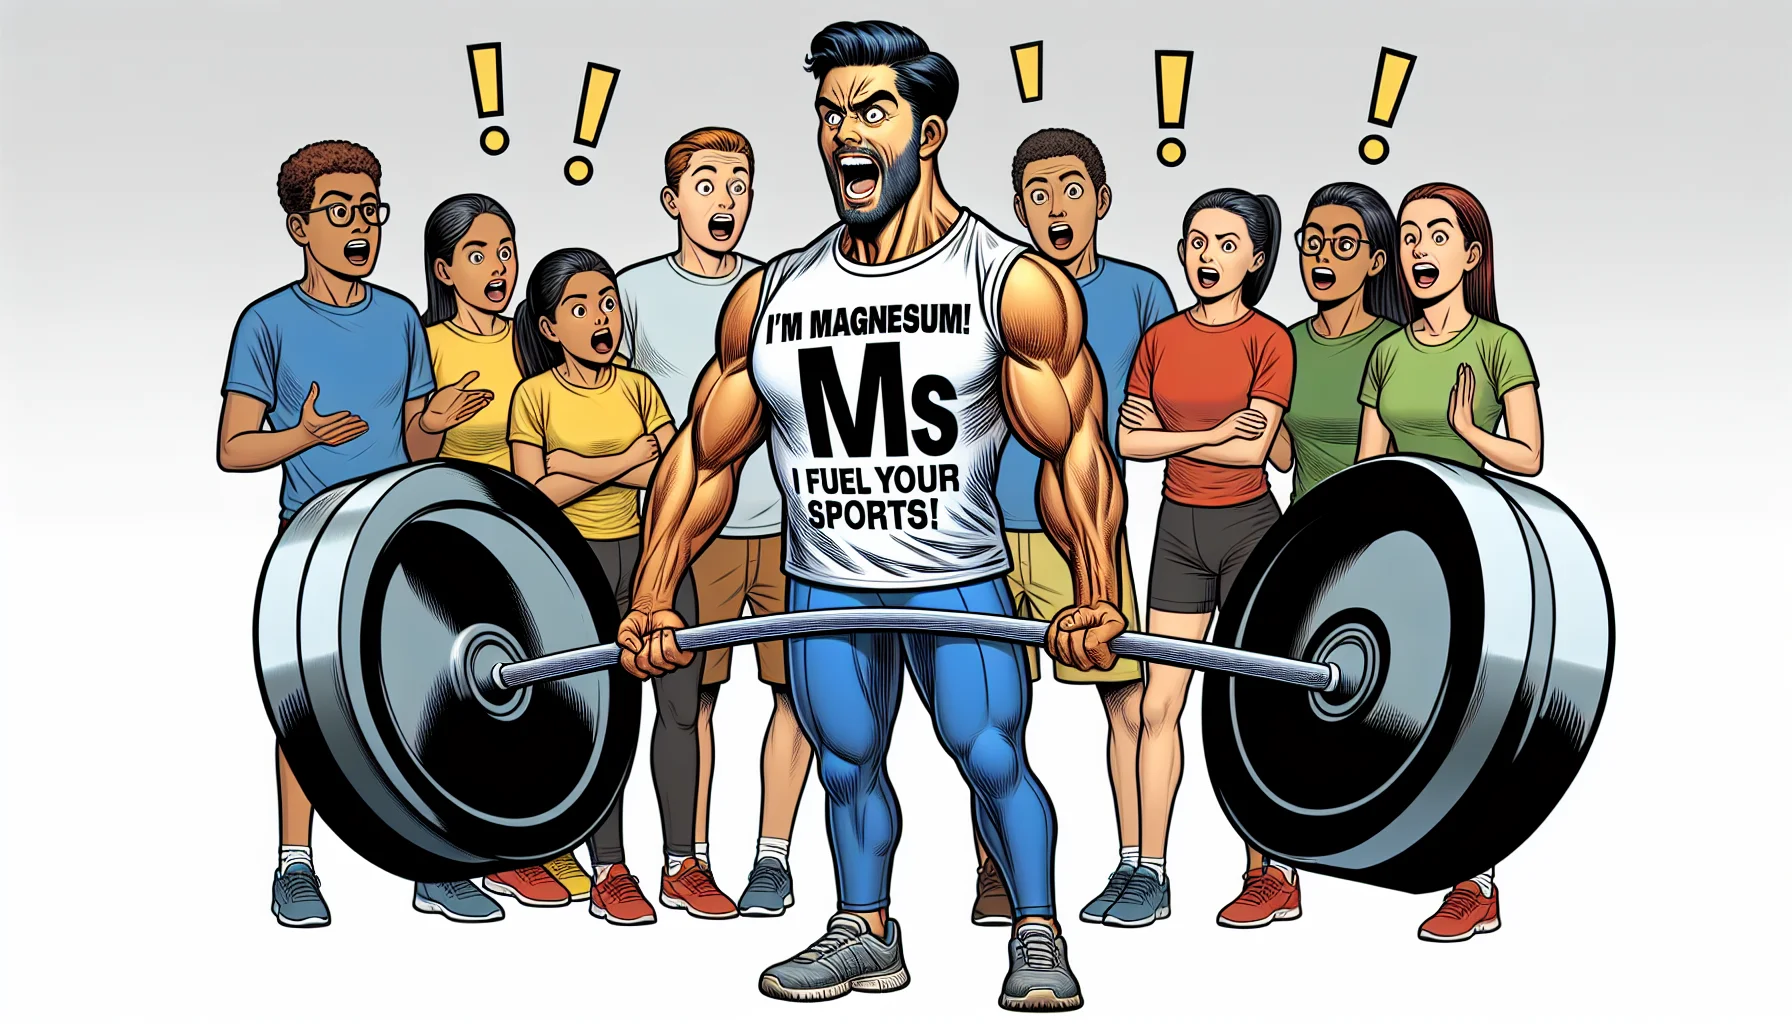 Create a realistic image that personifies the element magnesium as a fit, Hispanic comic character holding a barbell. This character is passionately leading a multicultural sports fitness class. The character's shirt explicitly states 'I'm Magnesium! I fuel your sports!'. Around the character, the class attendees are surprisingly surprised and becoming enticed to use dietary supplements. They are showing expressions ranging from serious curiosity to eager enthusiasm.